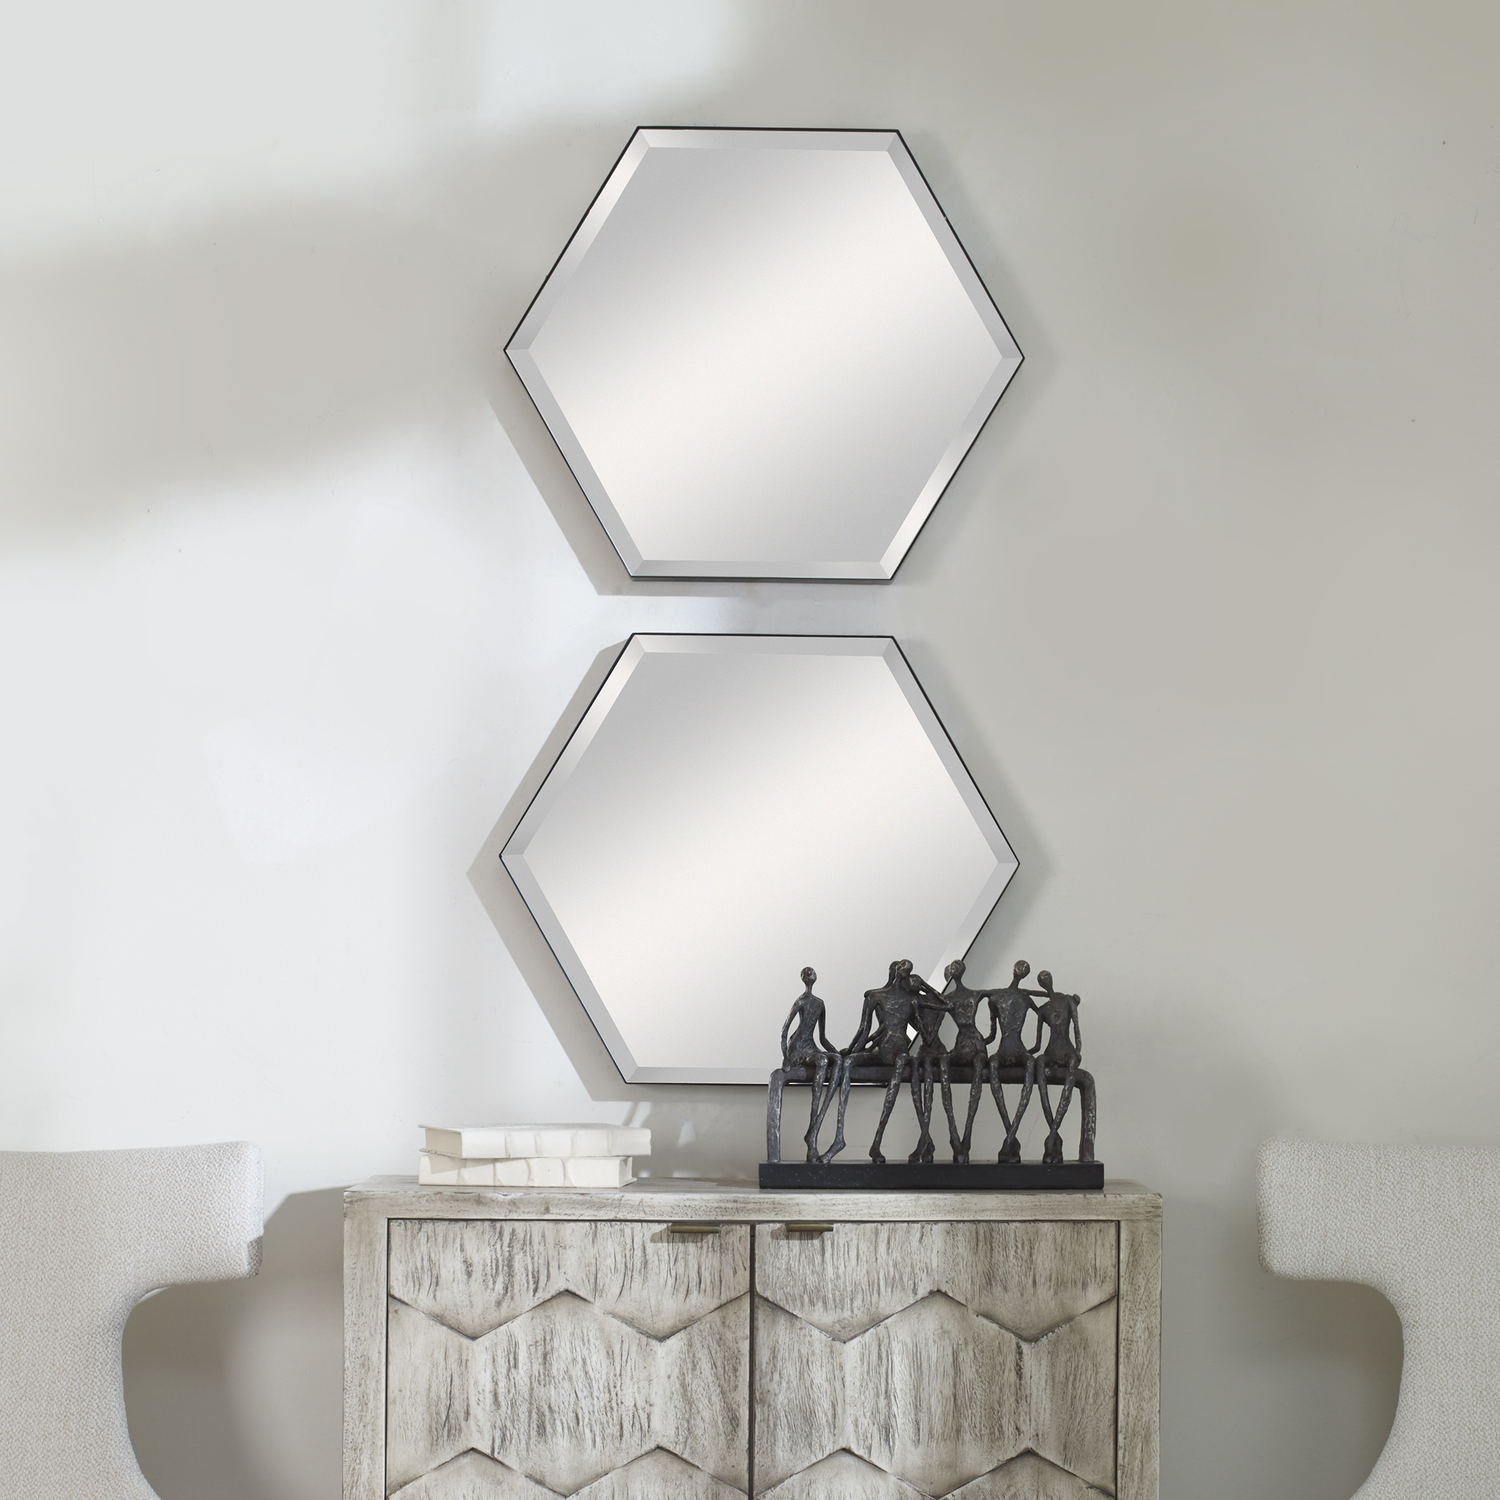 chassis mirror Uttermost Octagonal Mirror This Set Of Two Hexagon Mirrors Are Encased In Thick Iron Bands Finished In A Soft Matte Black. Each Mirror Has A 1" Bevel And May Be Hung Horizontal Or Vertical.